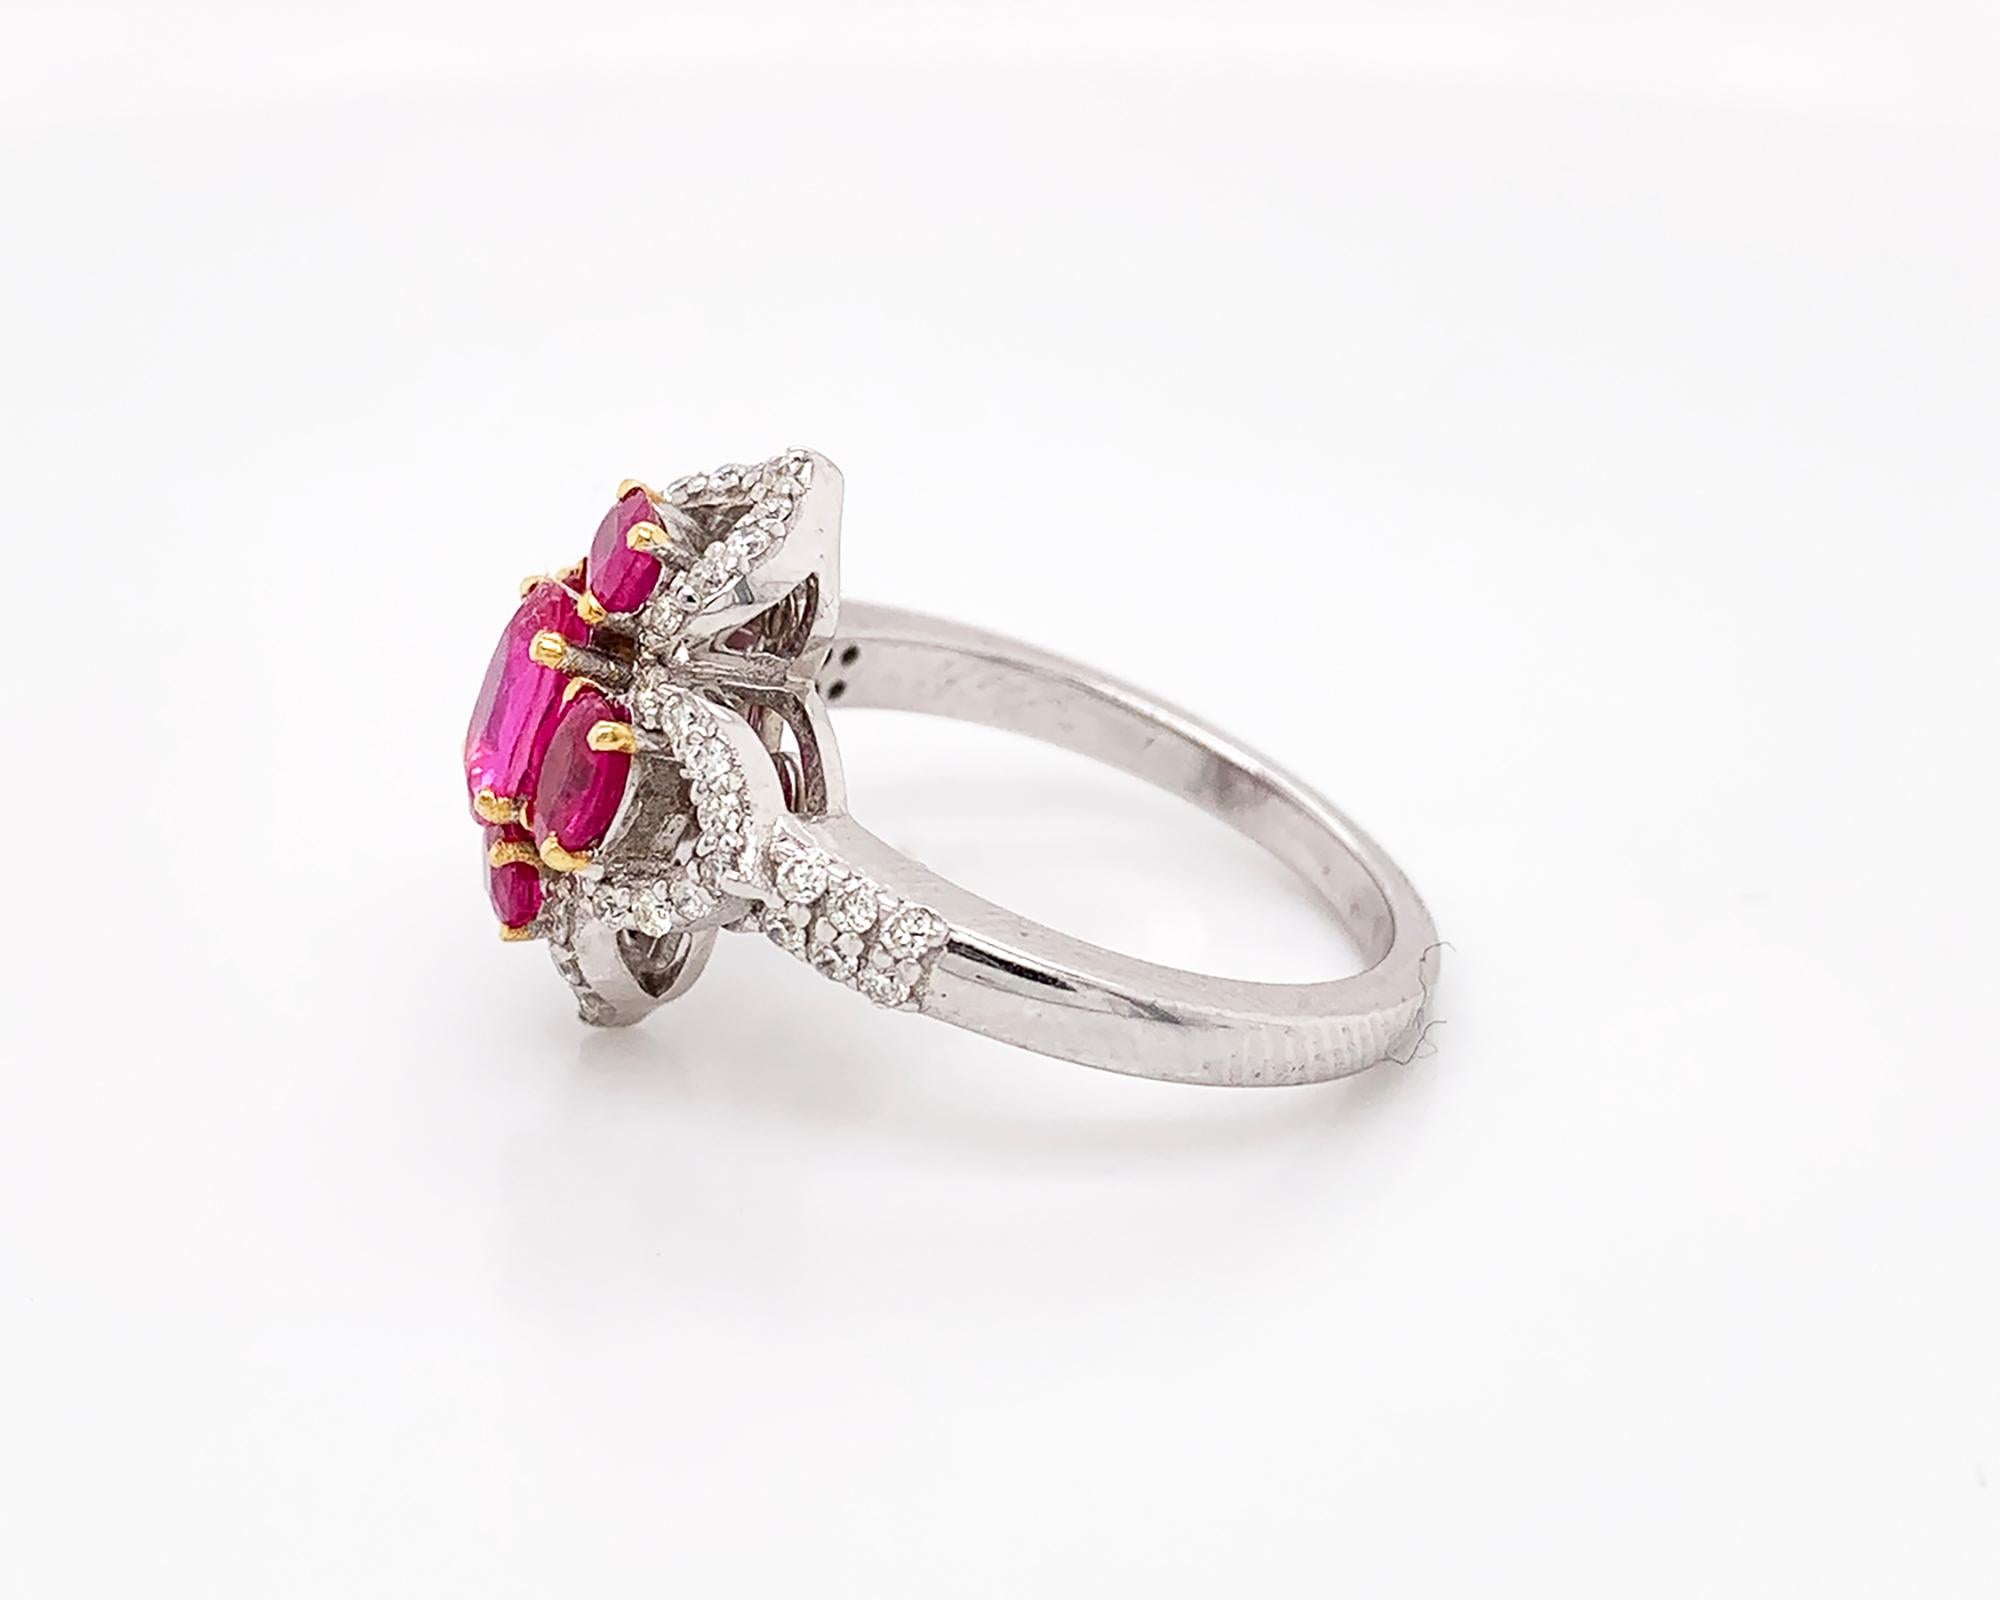 An elegant ring designed as a clover and embellished with rubies and diamonds.
5 oval rubies weighing 1.26 carats.
White pave diamonds weighing 0.71 carats.
The ring is made of 18K white gold. Weight of the ring is 5.42 grams.
Size 5.75